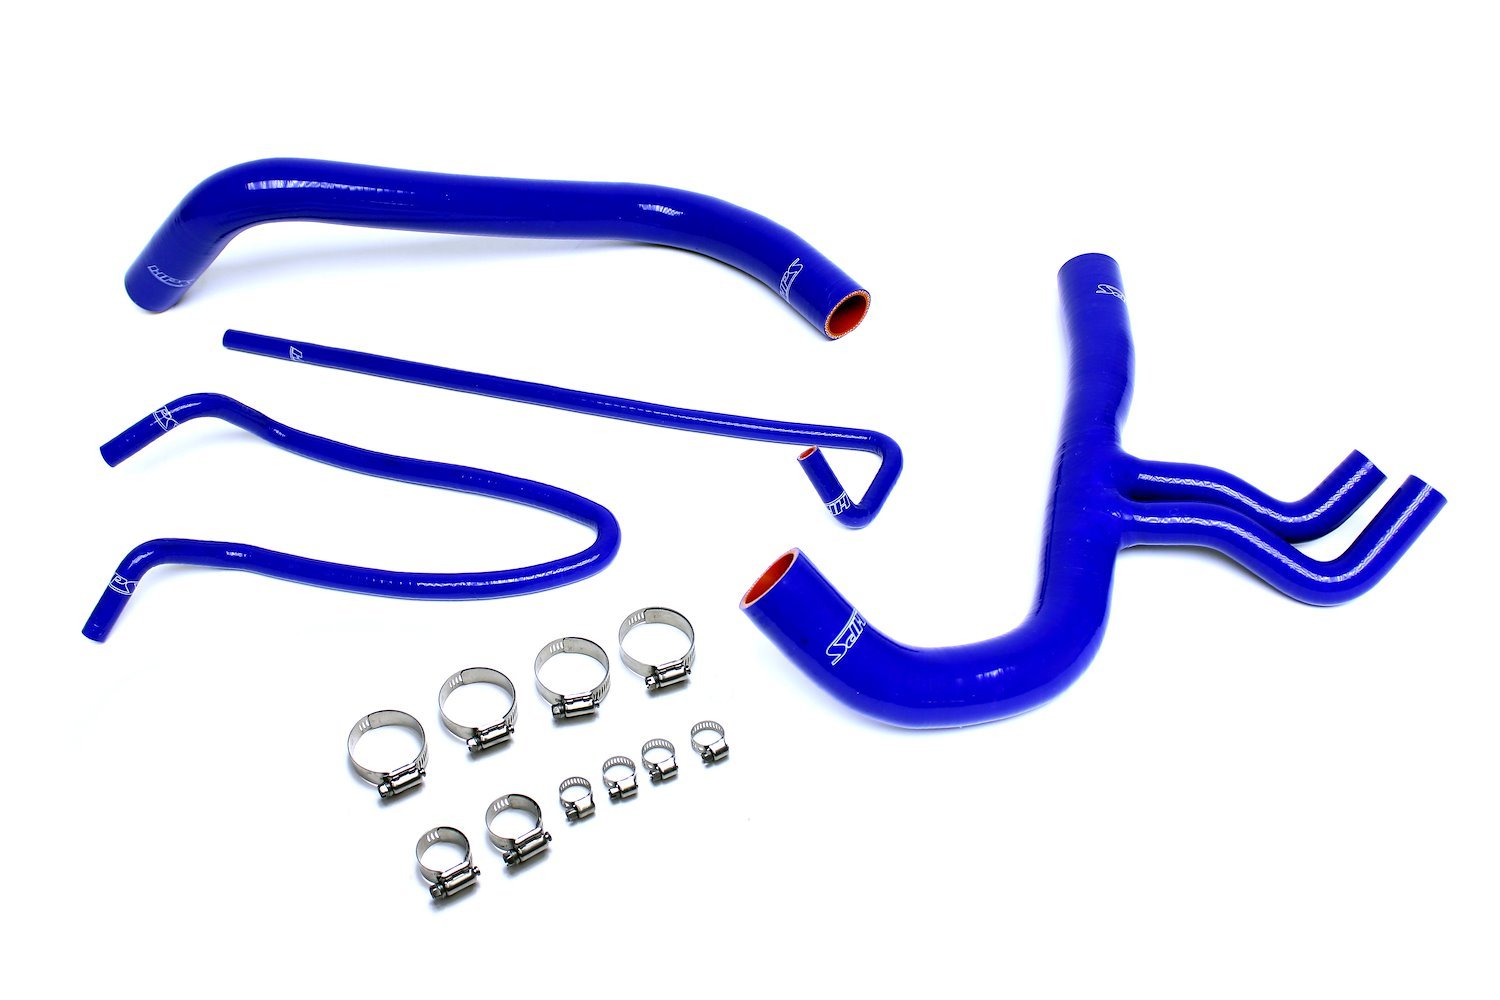 57-1402-BLUE Radiator Hose Kit, High-Temp 3-Ply Reinforced Silicone, Replace OEM Rubber Radiator Coolant Hoses